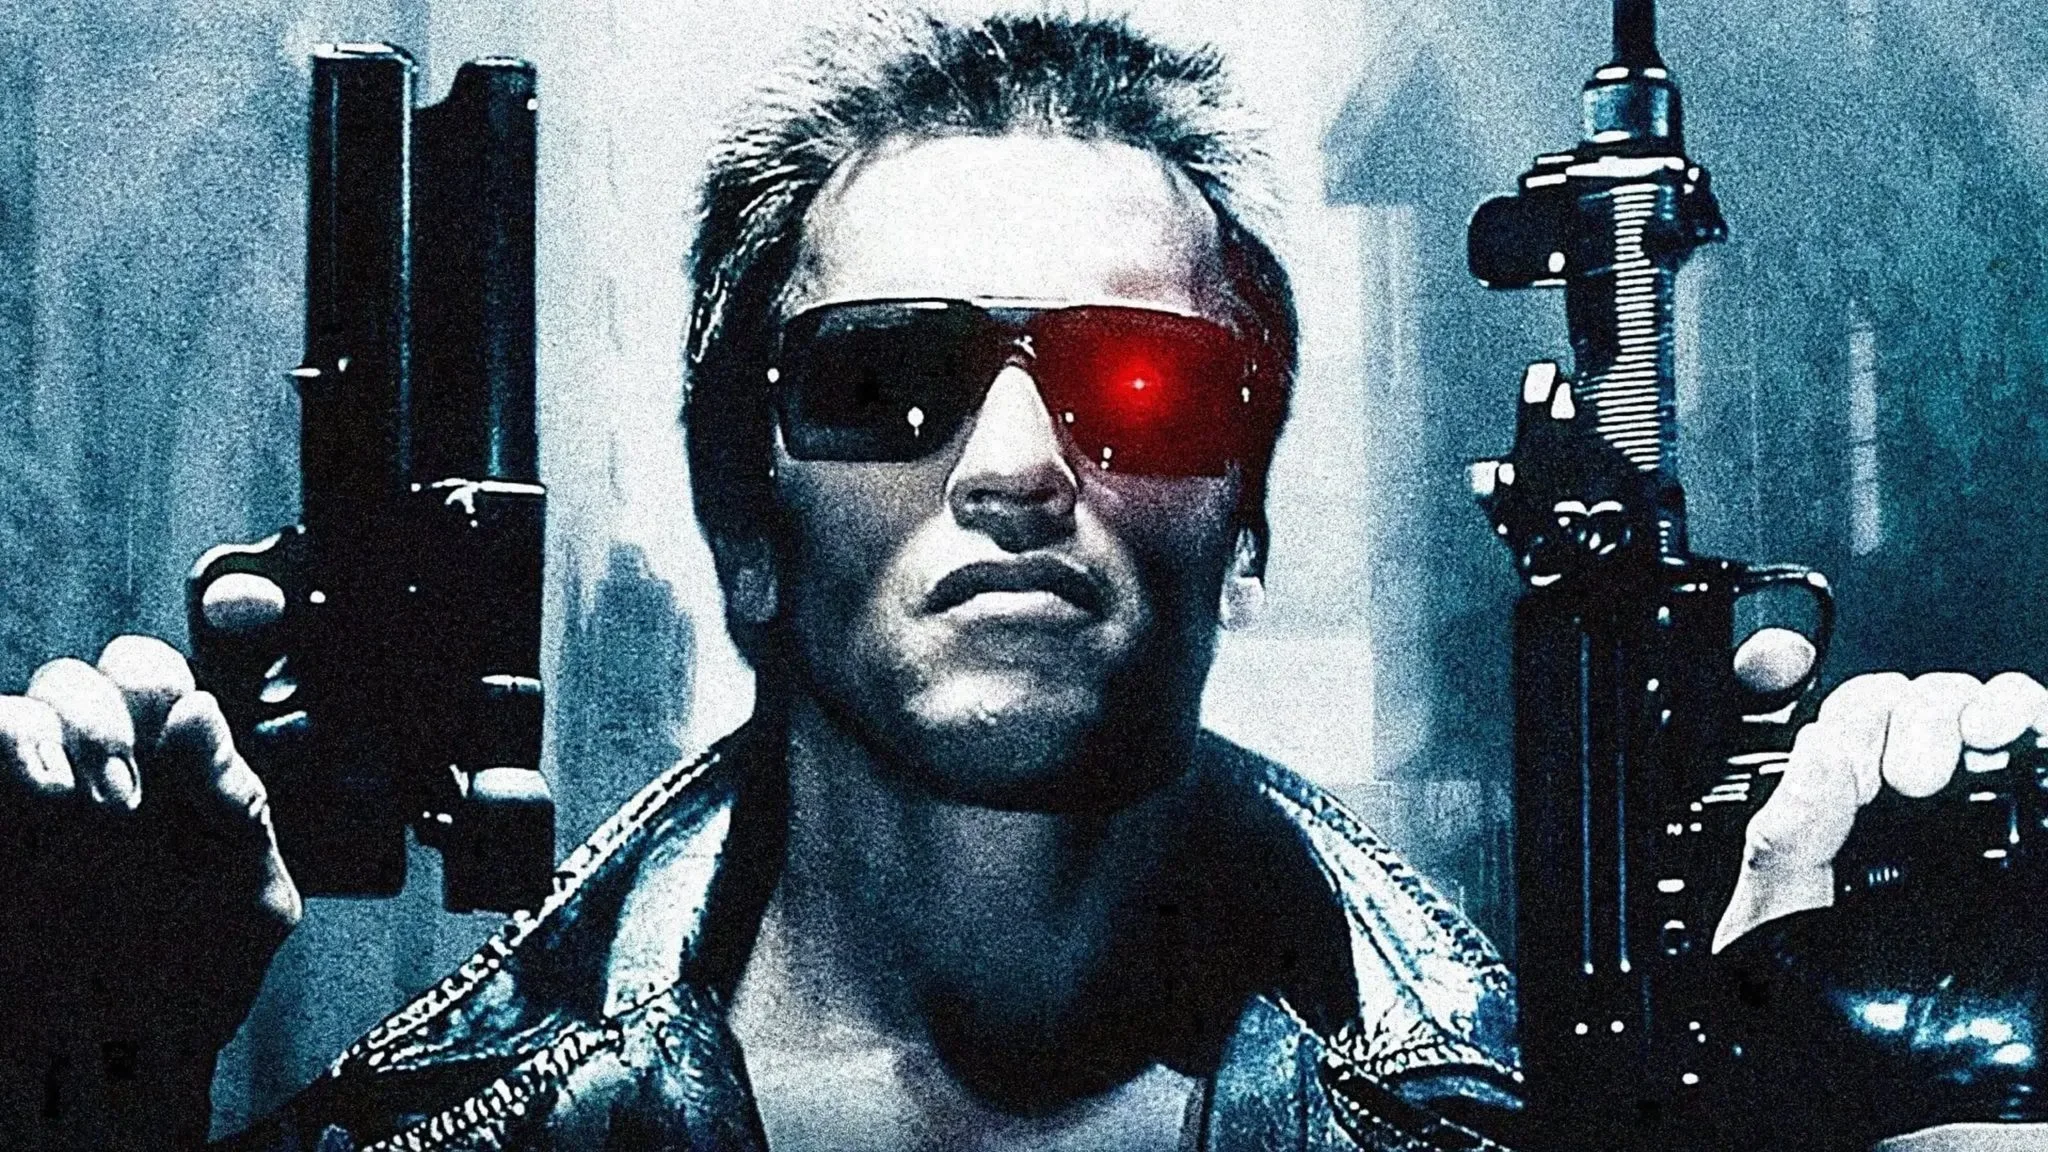 The neural network showed its own version of the film “Terminator”